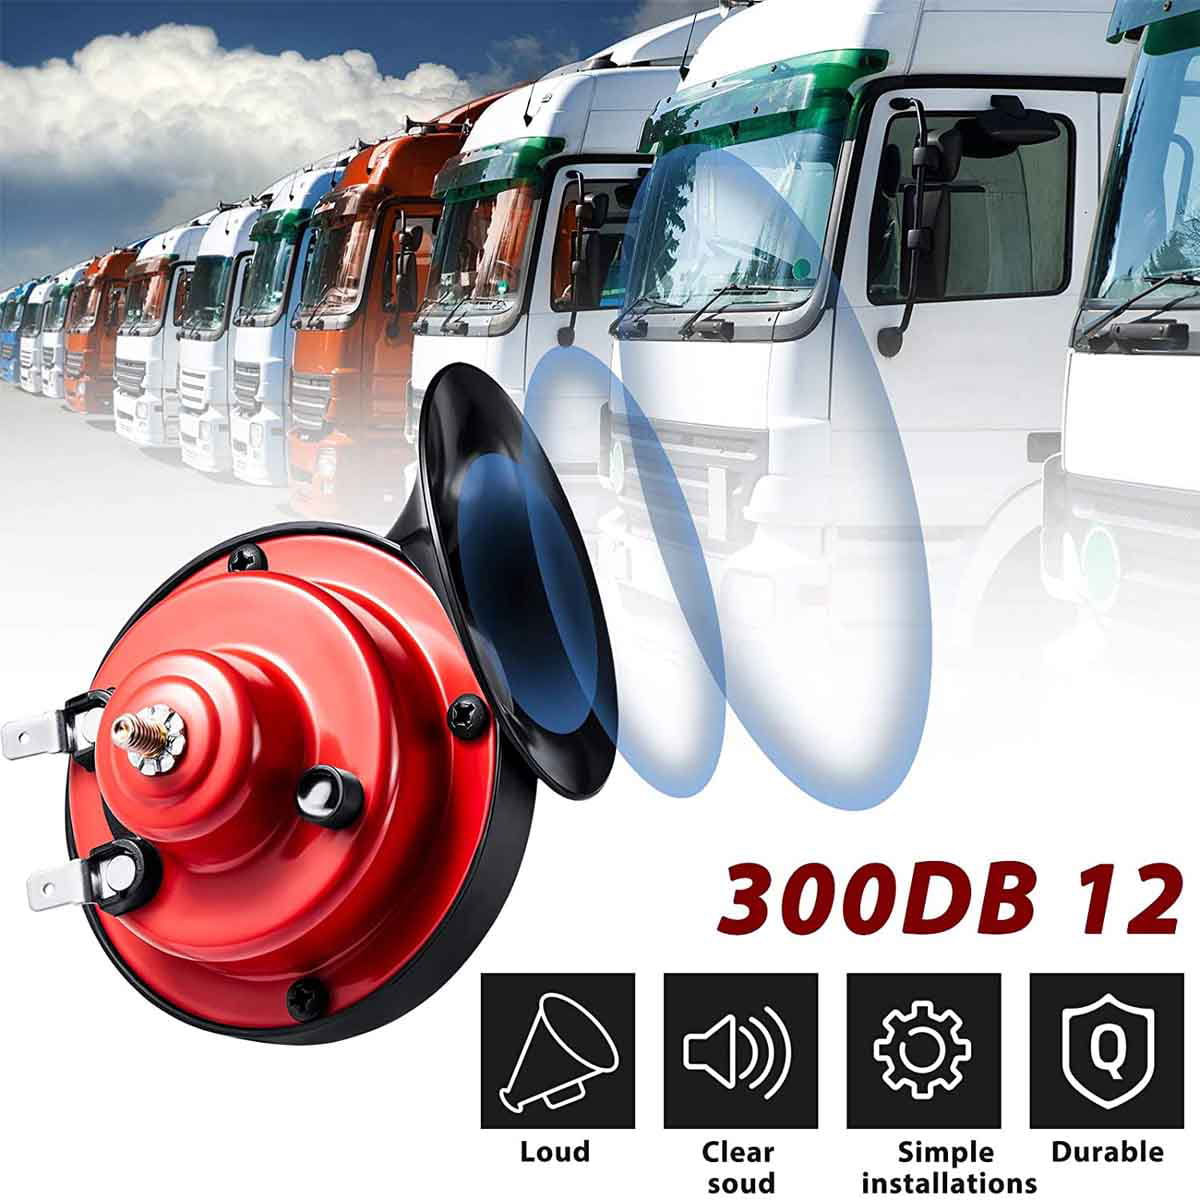 12V 300DB Super Train Horn for Trucks SUV Car Boat Motorcycles, Electric  Air Horns Raging Sound Waterproof 